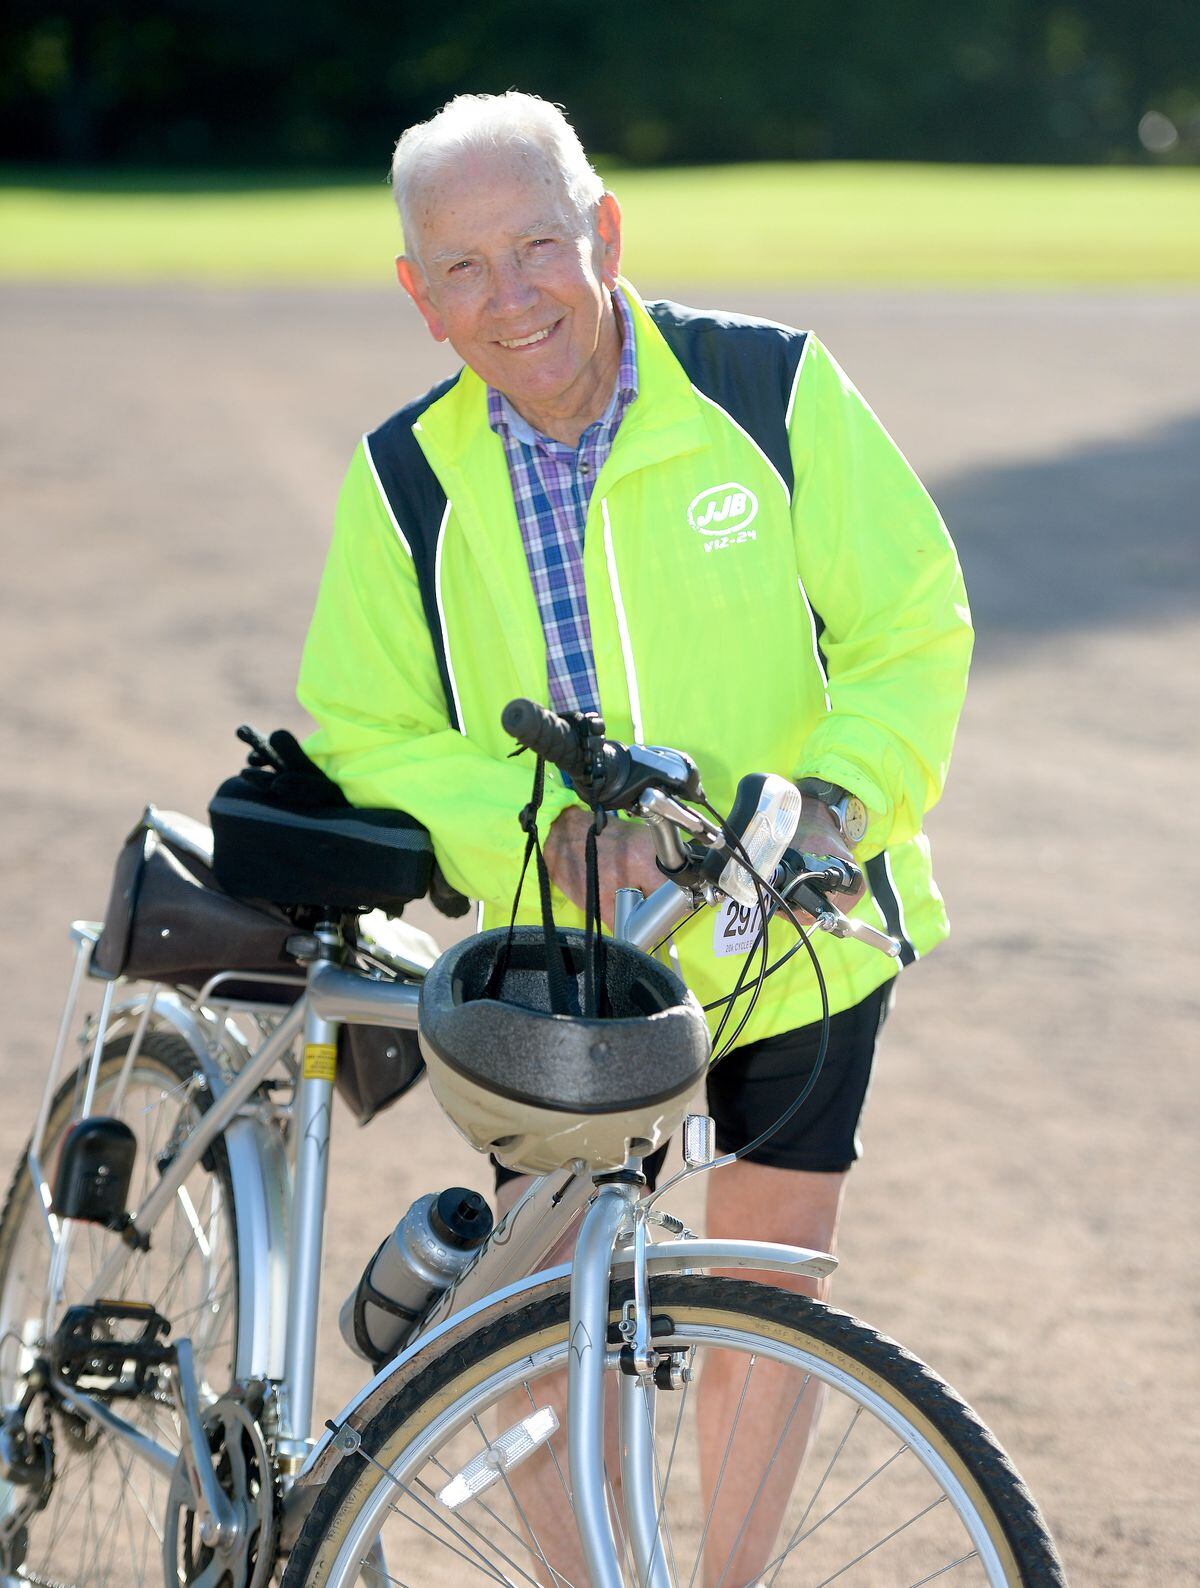 Dudley Fawcett, aged 80, from Wednesfield, who was taking part in the 20k cycle race